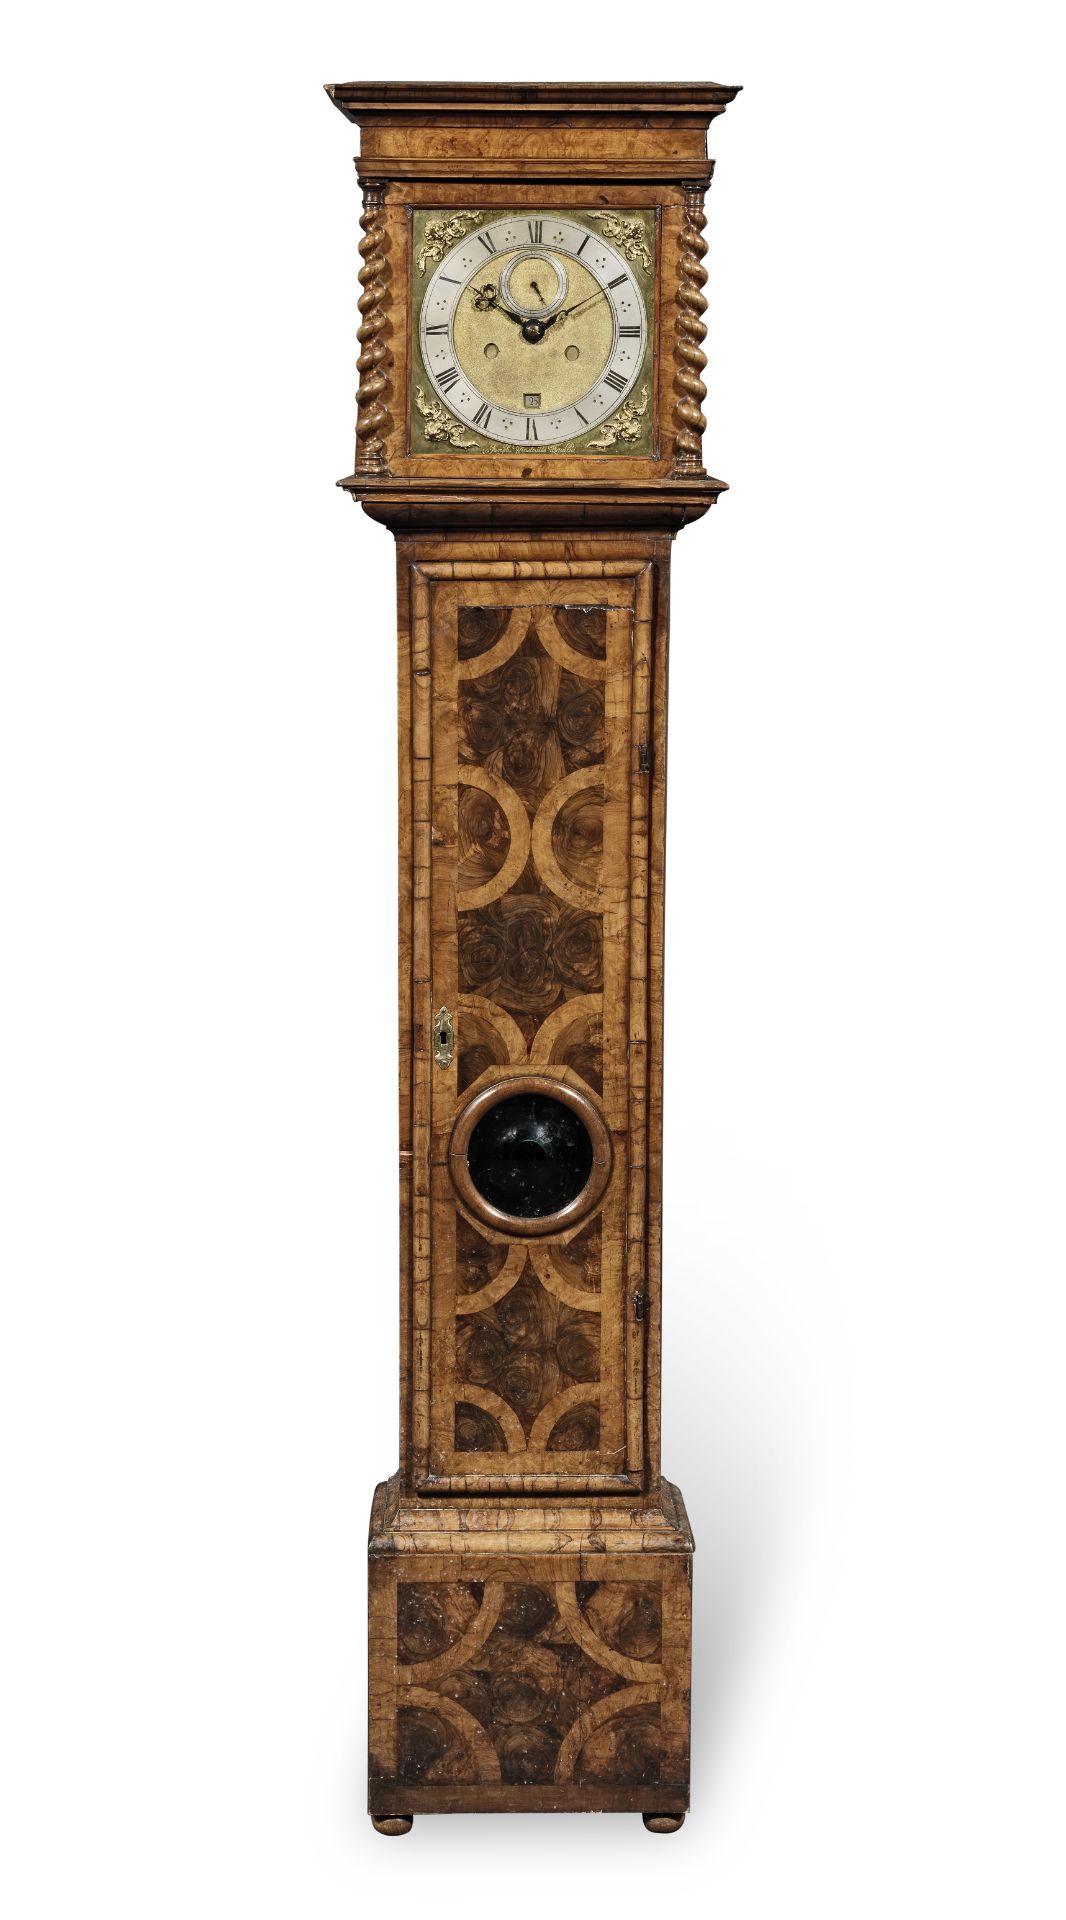 A burr walnut and oyster veneered longcase clock with 10.25 inch dial and bolt-and-shutter maintaini